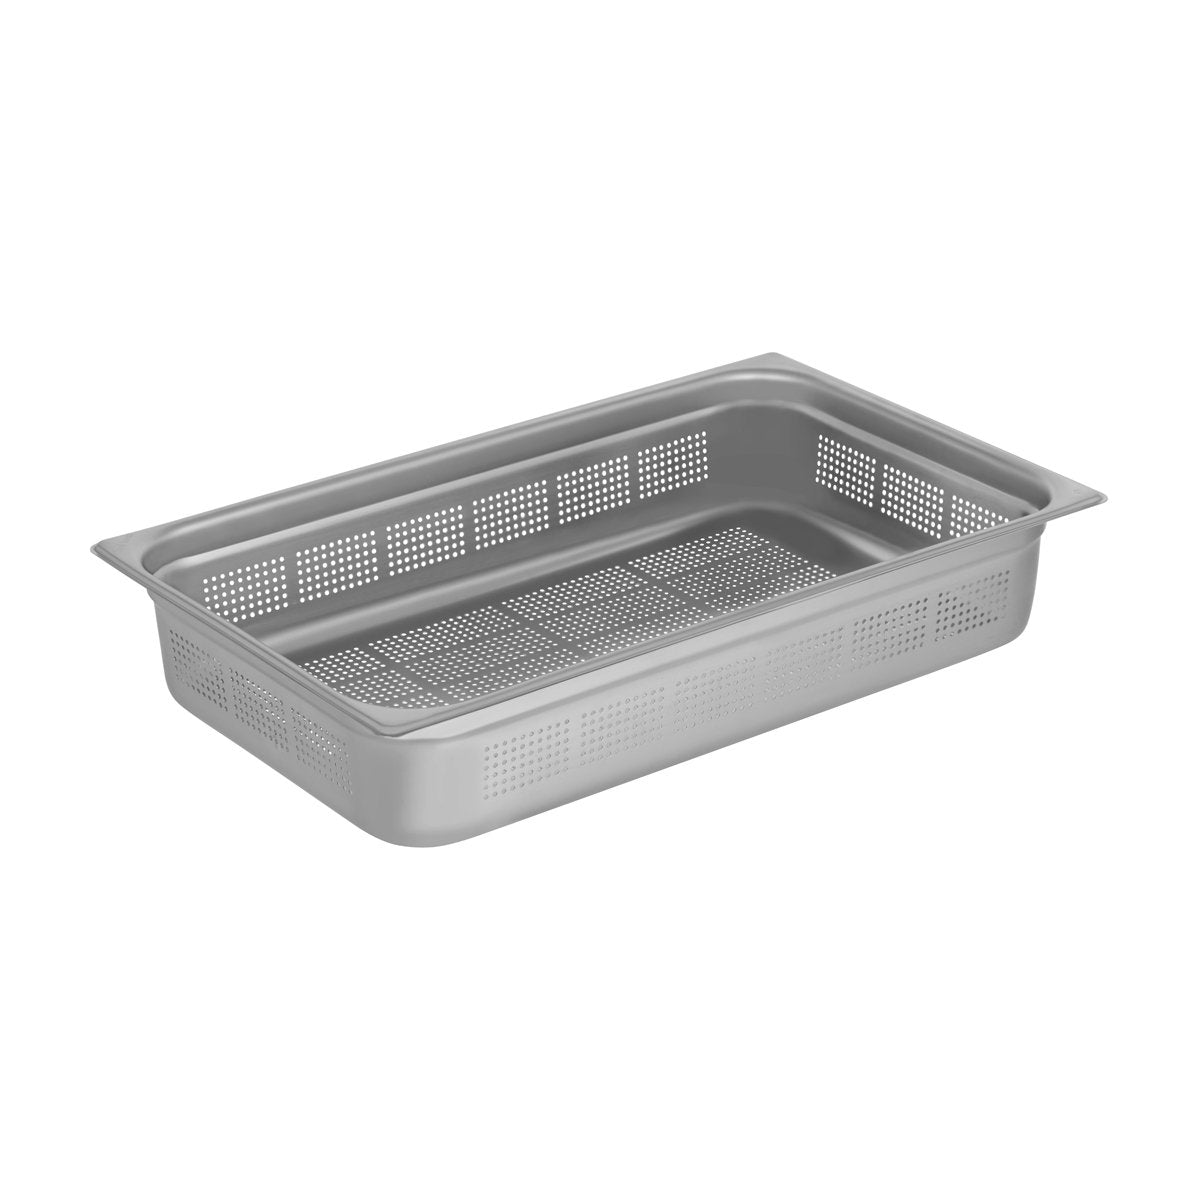 GNP-11100 Chef Inox Gastronorm Pan Perforated 1/1 Size 100mm Tomkin Australia Hospitality Supplies